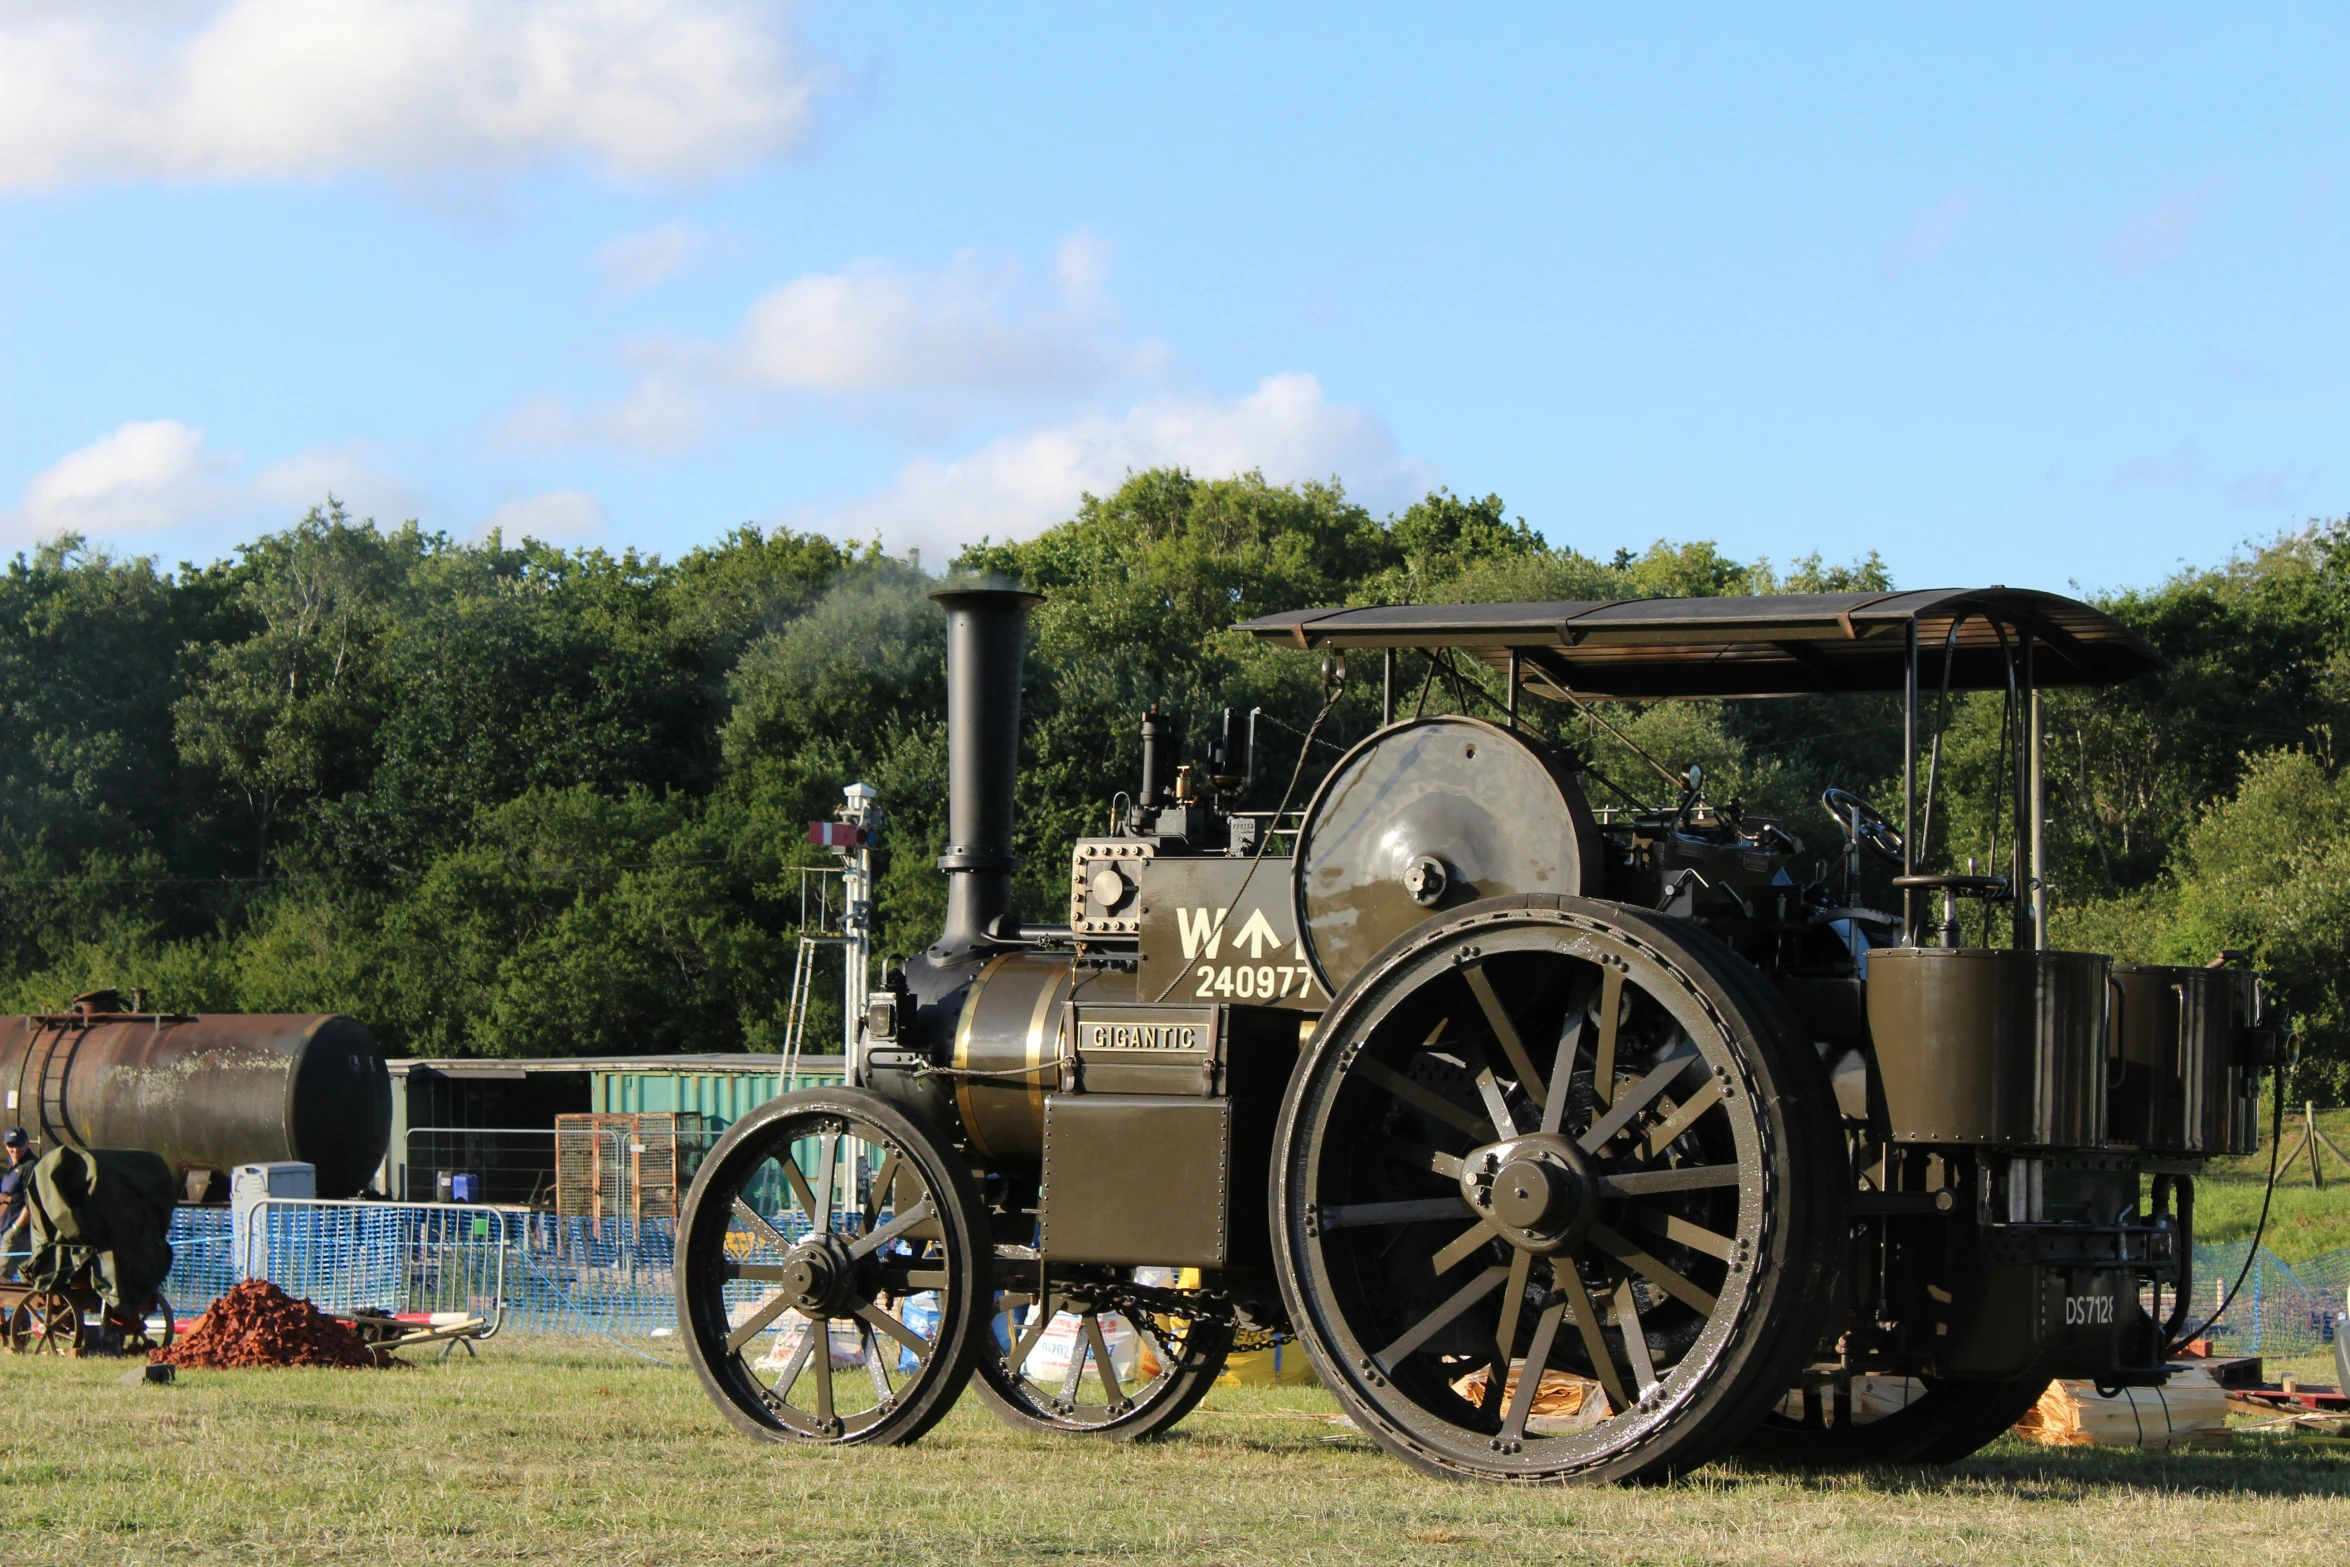 an antique locomotive engine and wagon sits on display